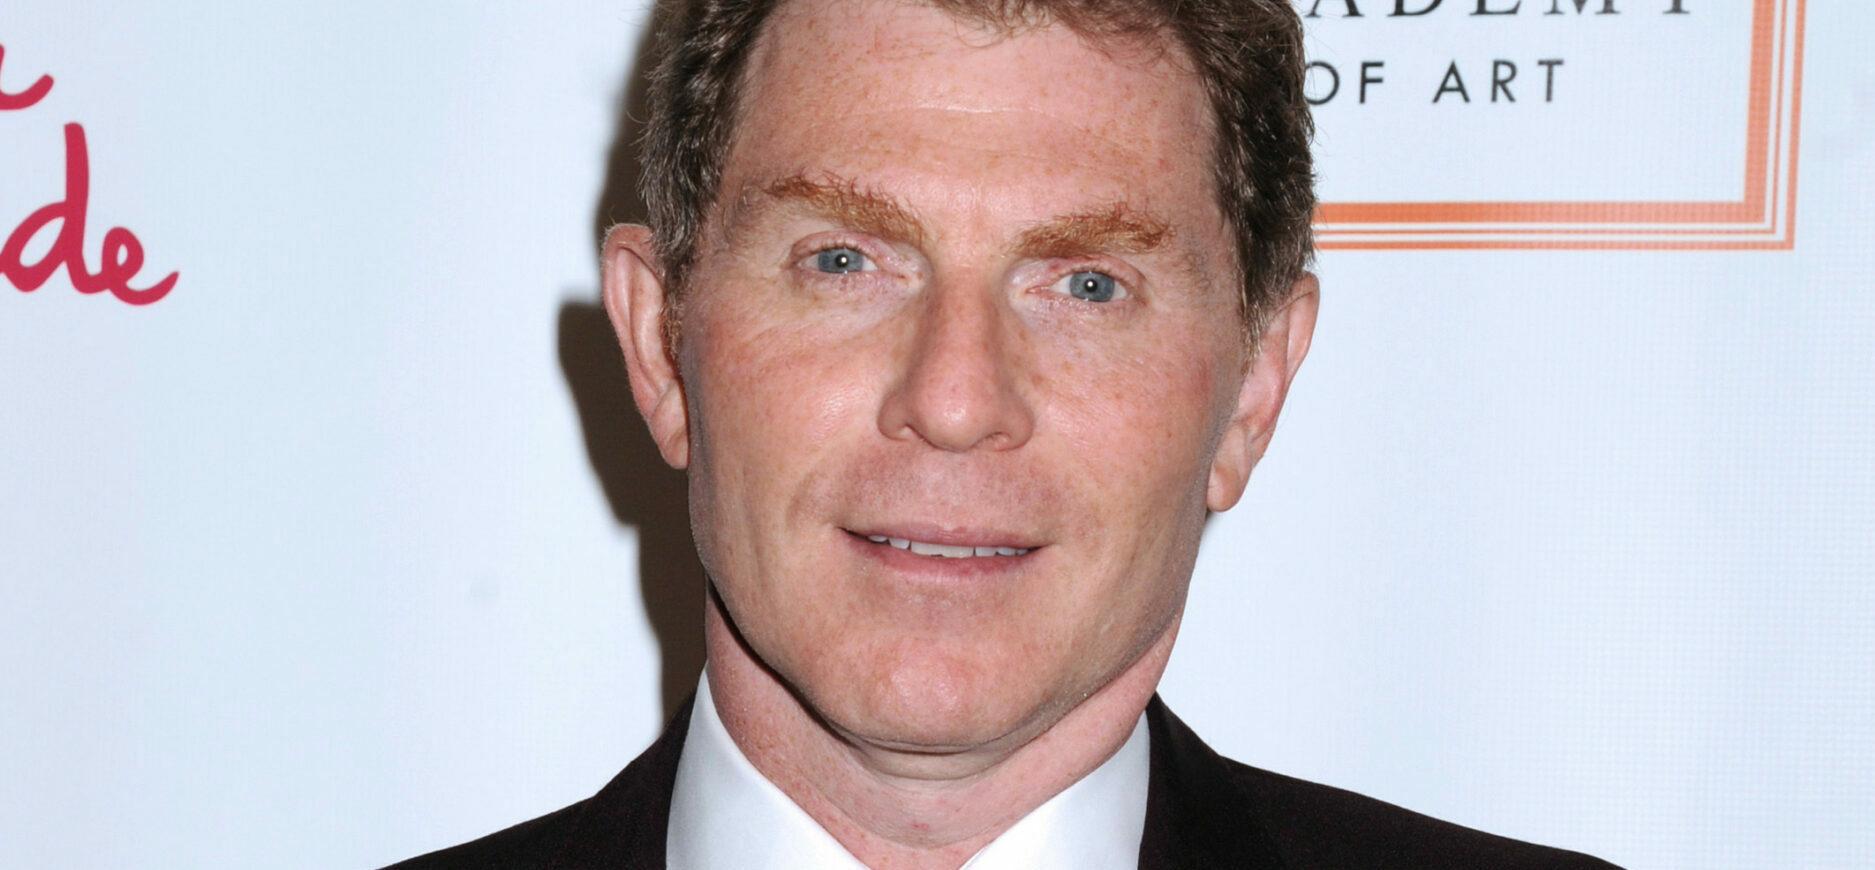 Bobby Flay Gives Fans A Peek At What’s Inside His Refrigerator!